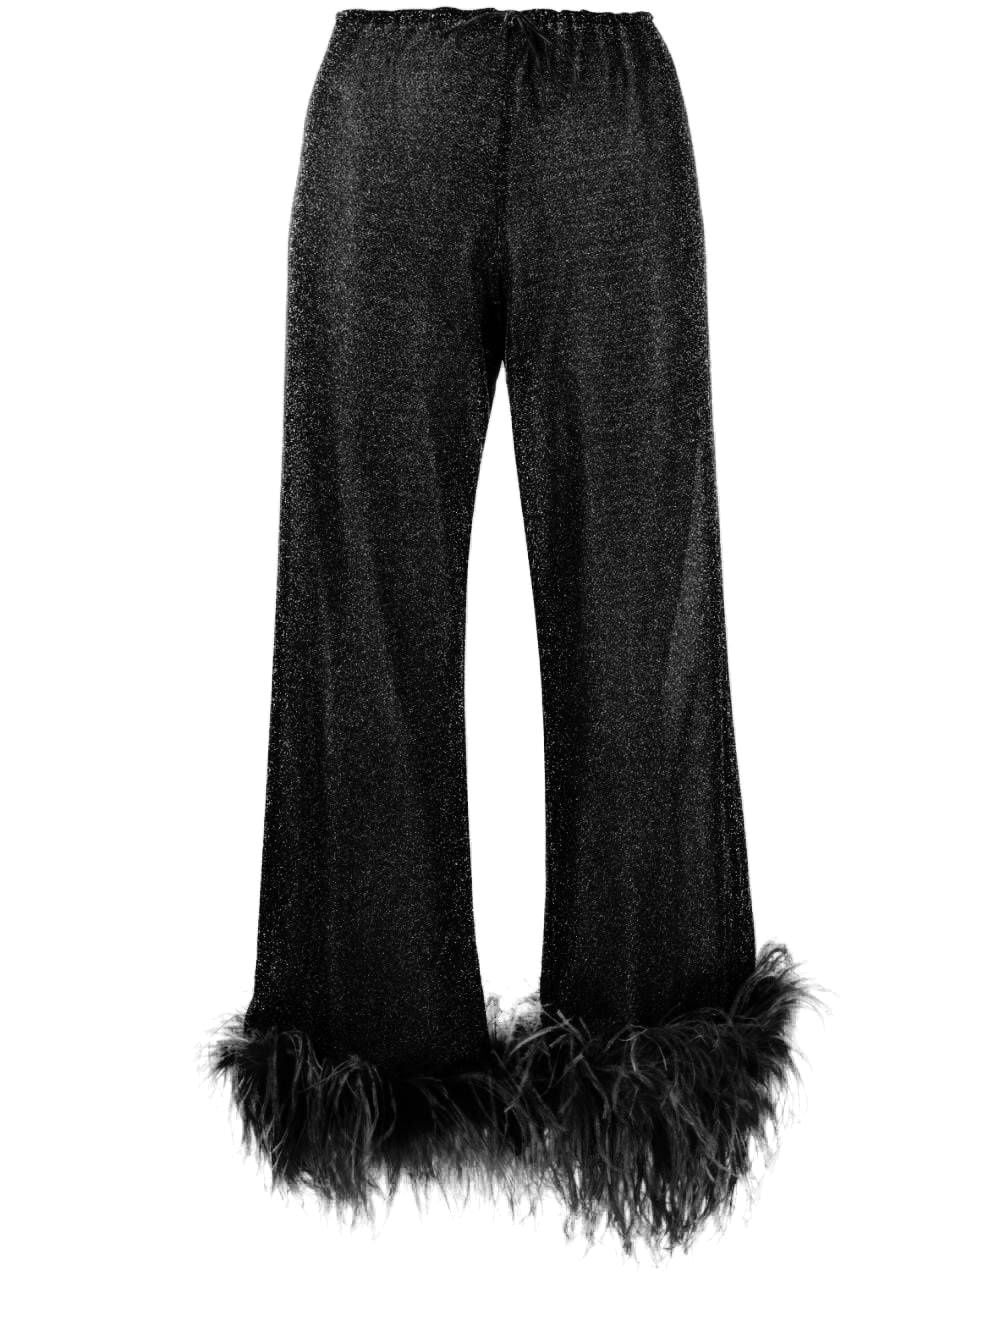 Women's trousers with ostrich feathers